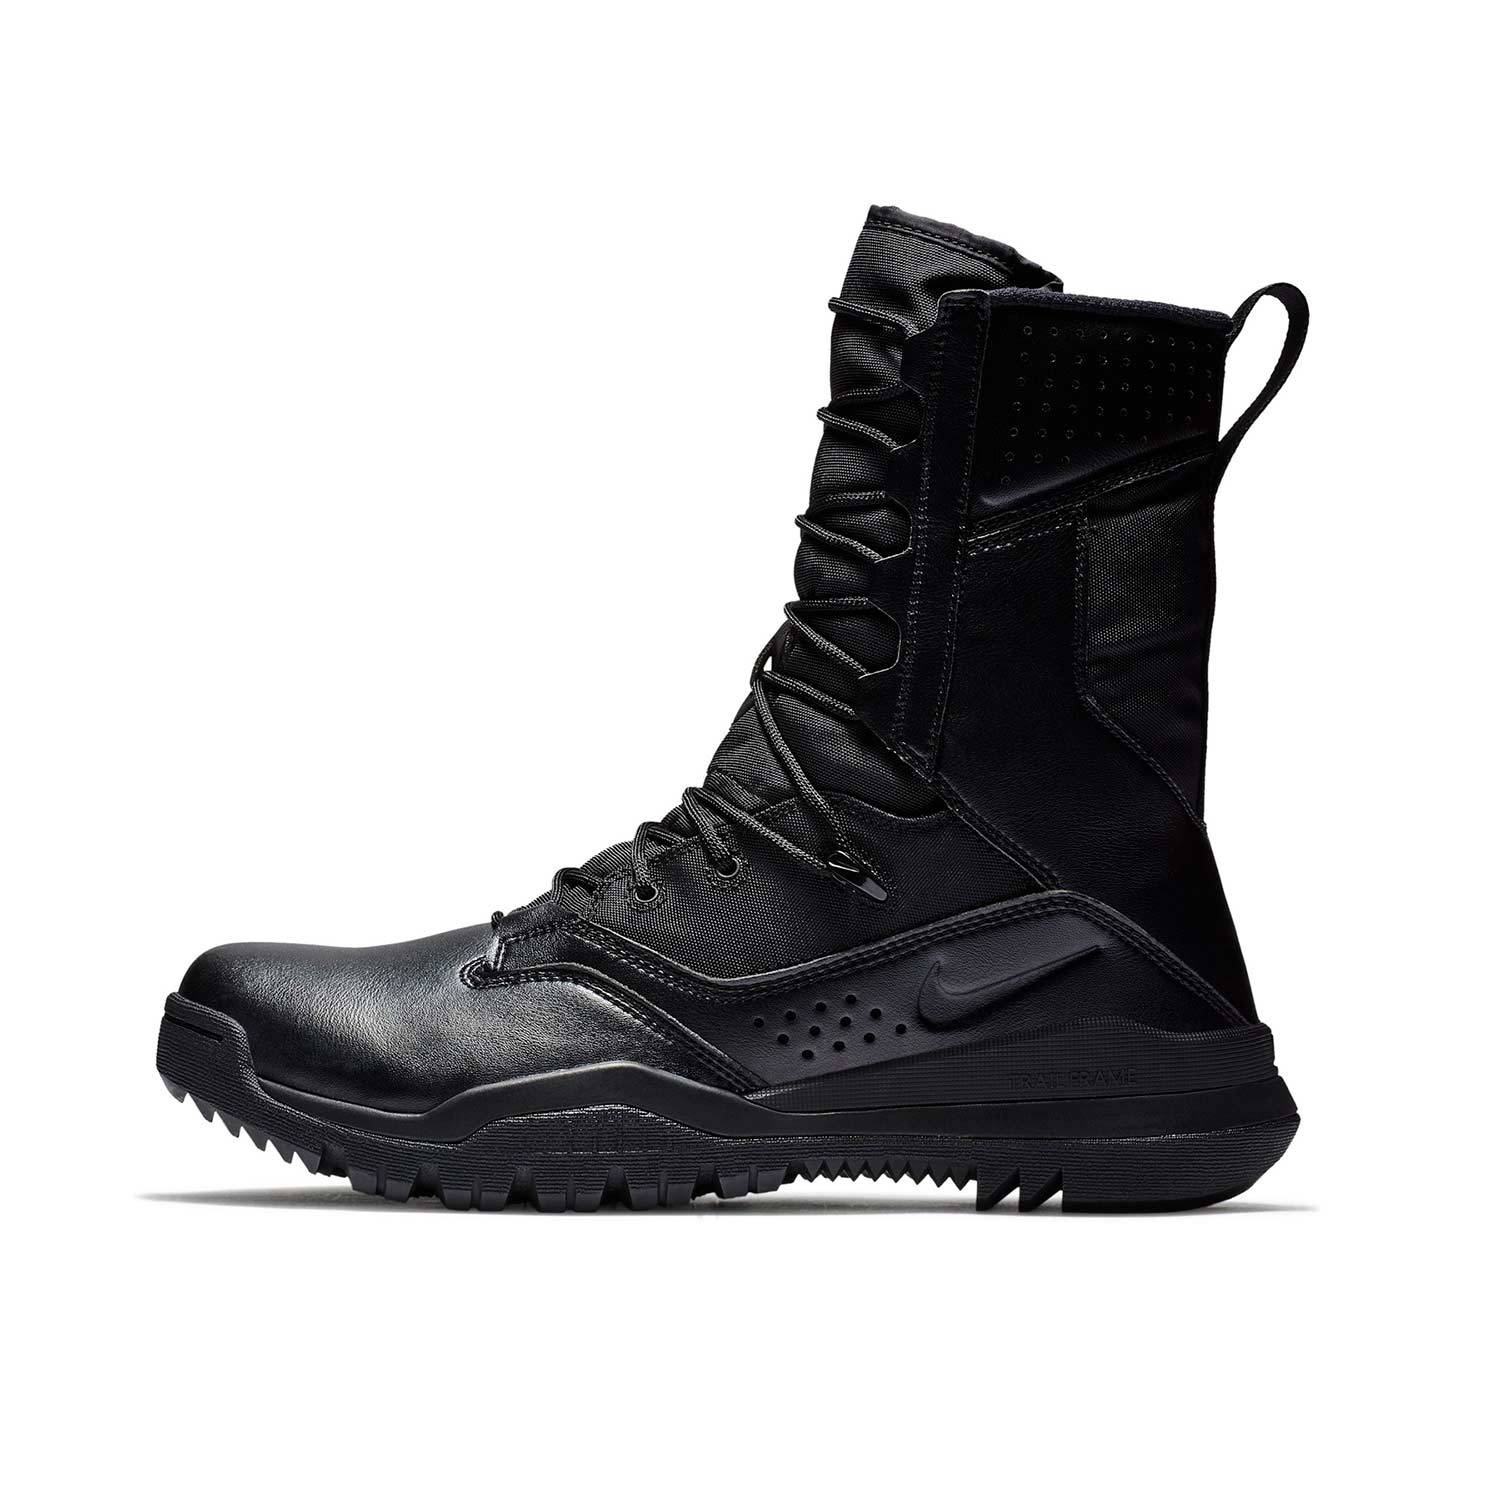 Nike SFB Boots for Police, Tactical & Military | Galls